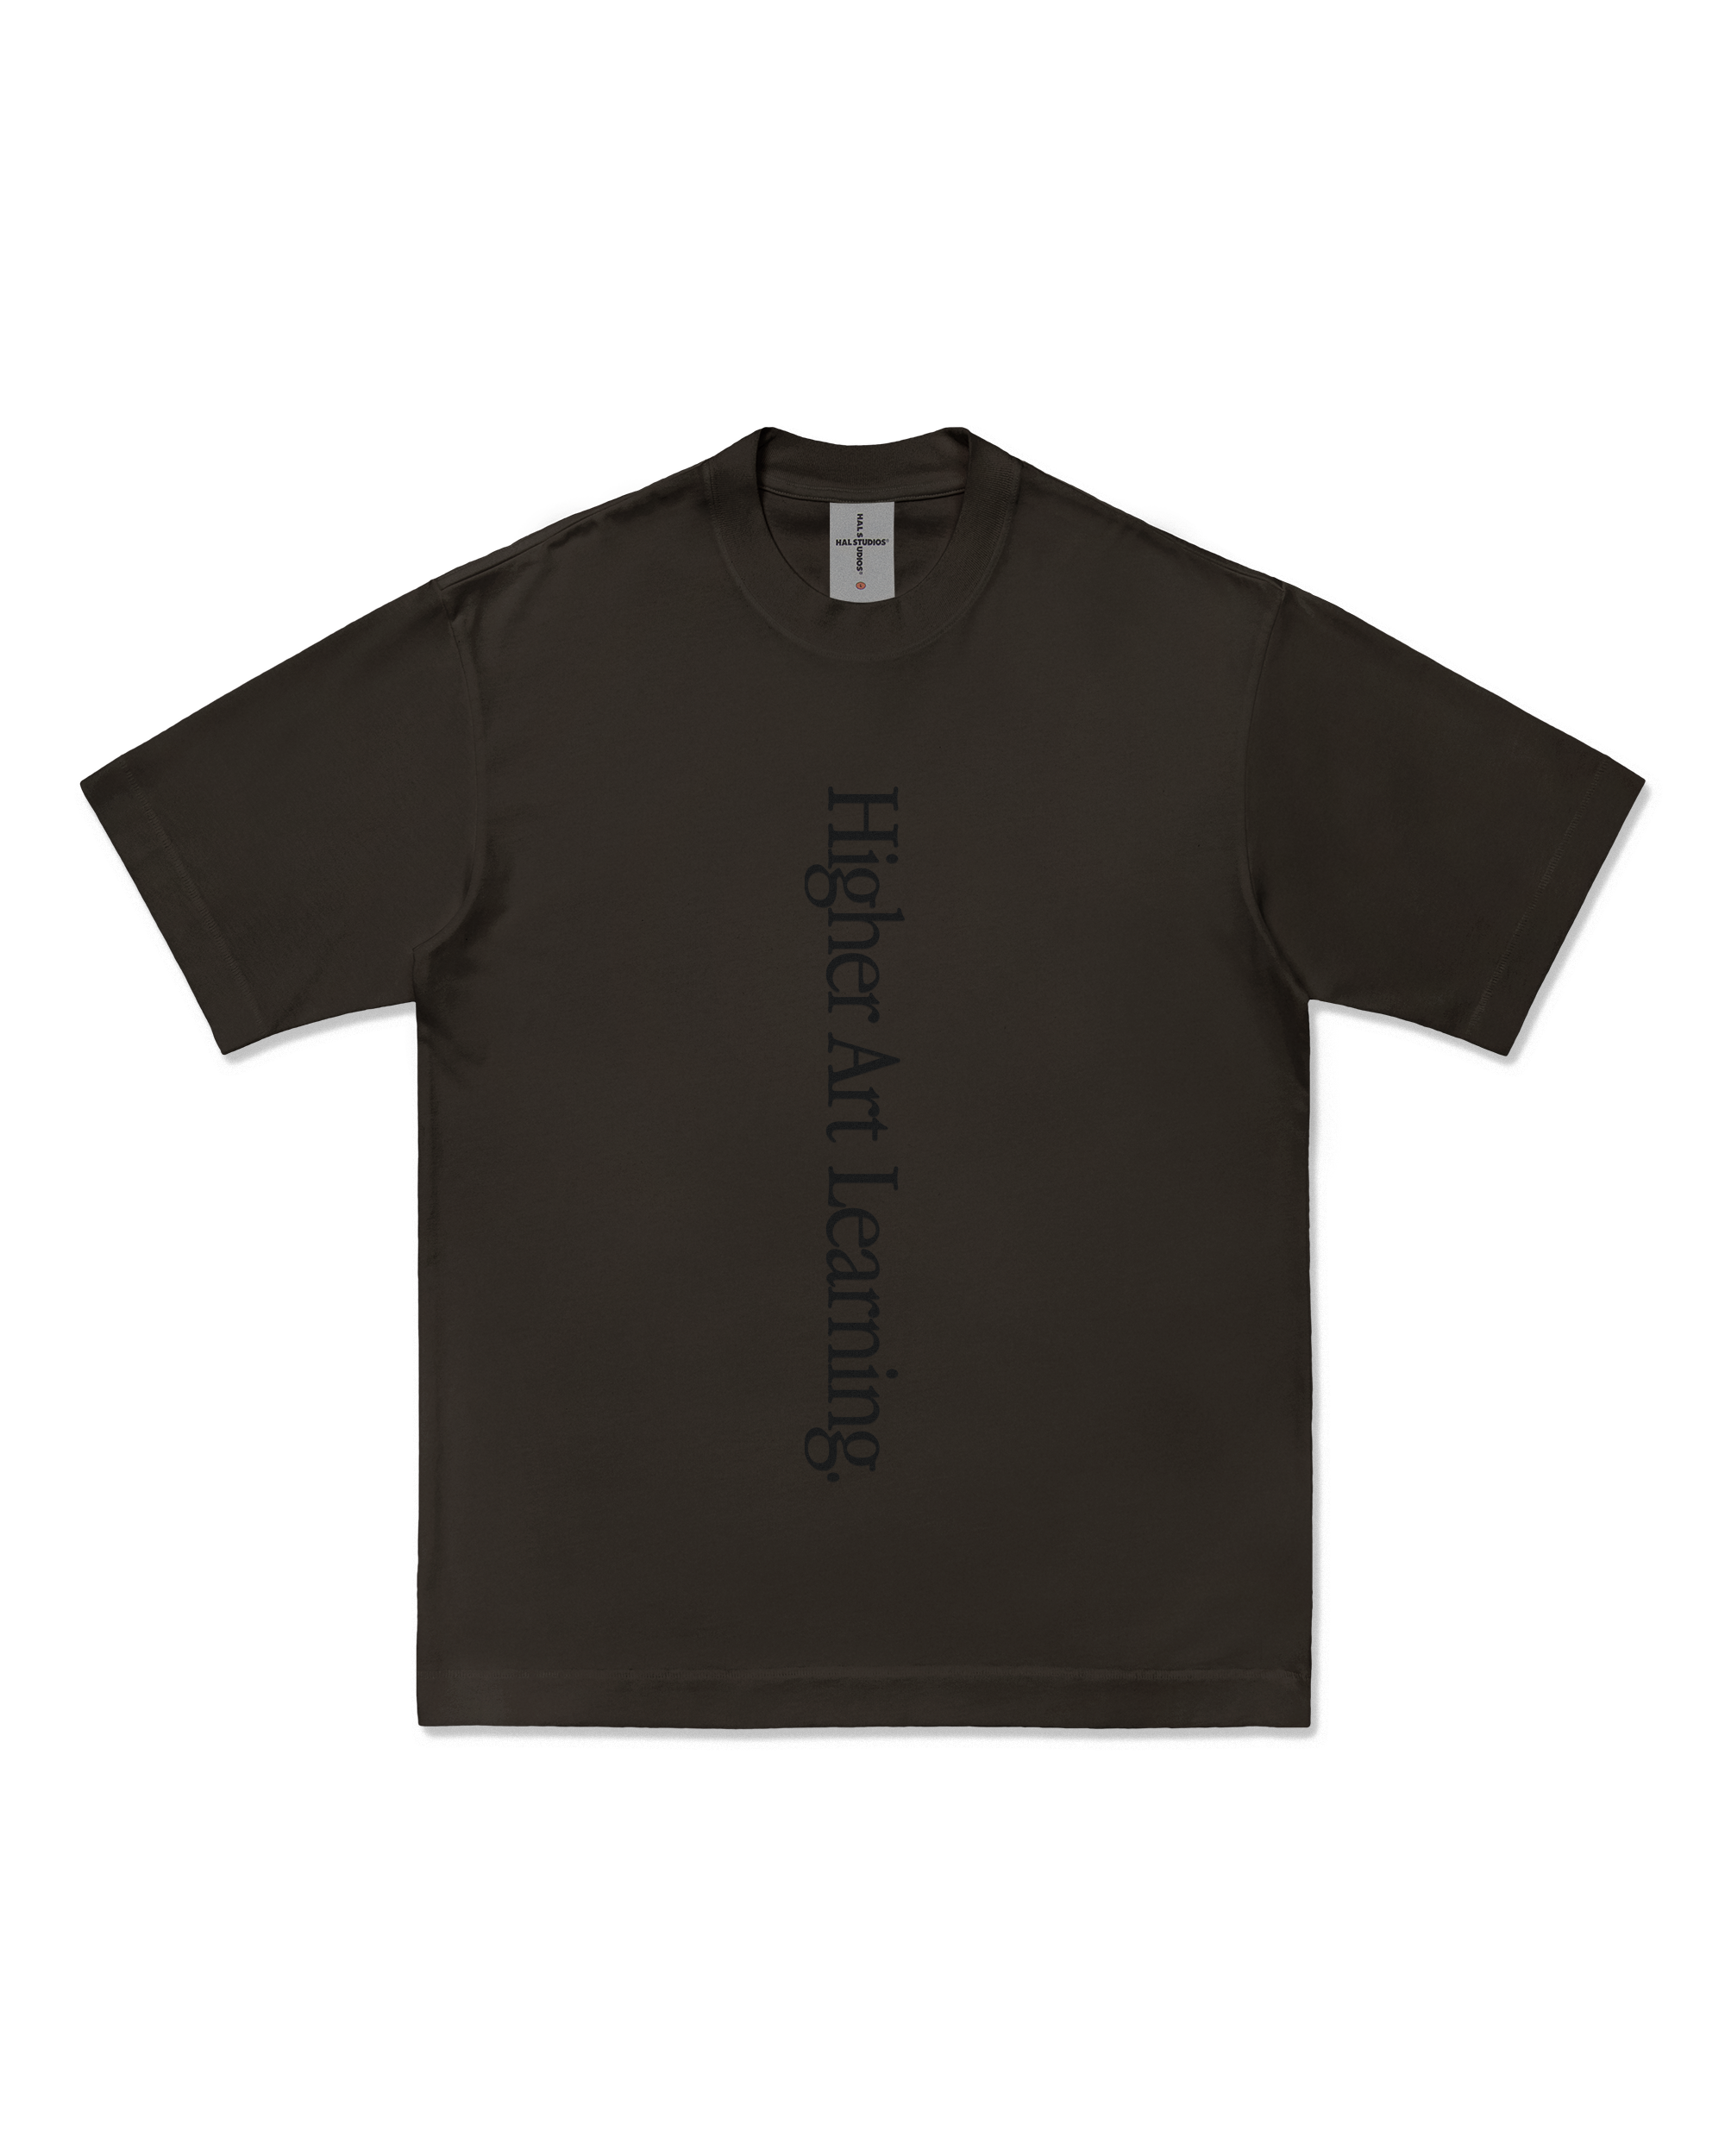 HIGHER ART LEARNING T-SHIRT - COFFEE